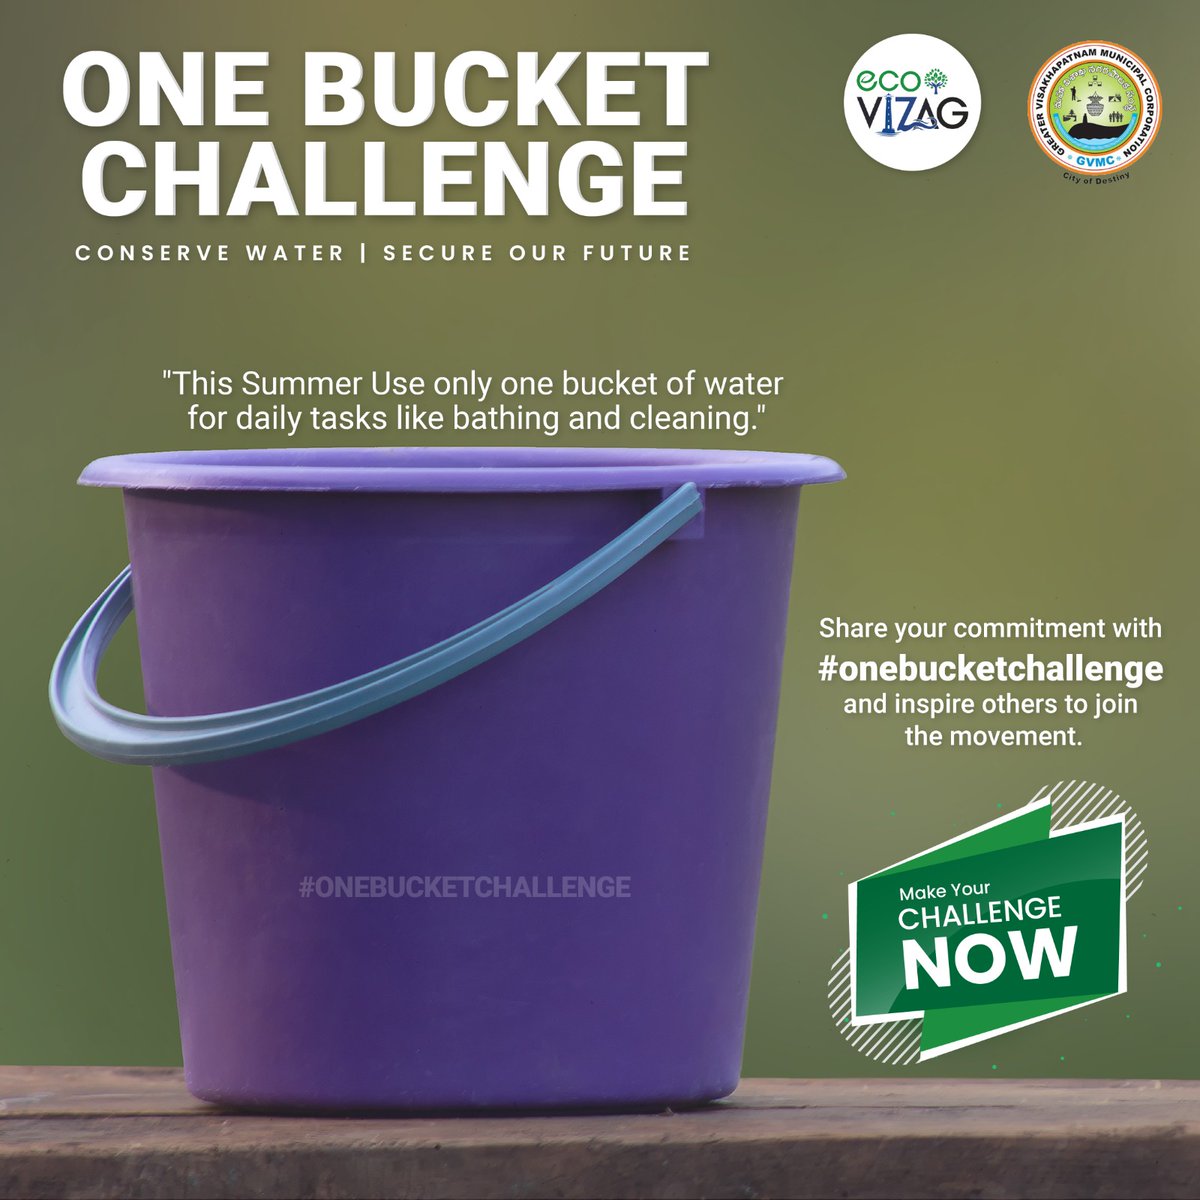 '🌊💧Join the One Bucket Challenge and make every drop count! 🚰💙 Let's make a big impact by using just one bucket for daily tasks and conserving water together. Every drop saved makes a difference! Let's take the challenge and inspire others to do the same! @SwachhBharatGov…